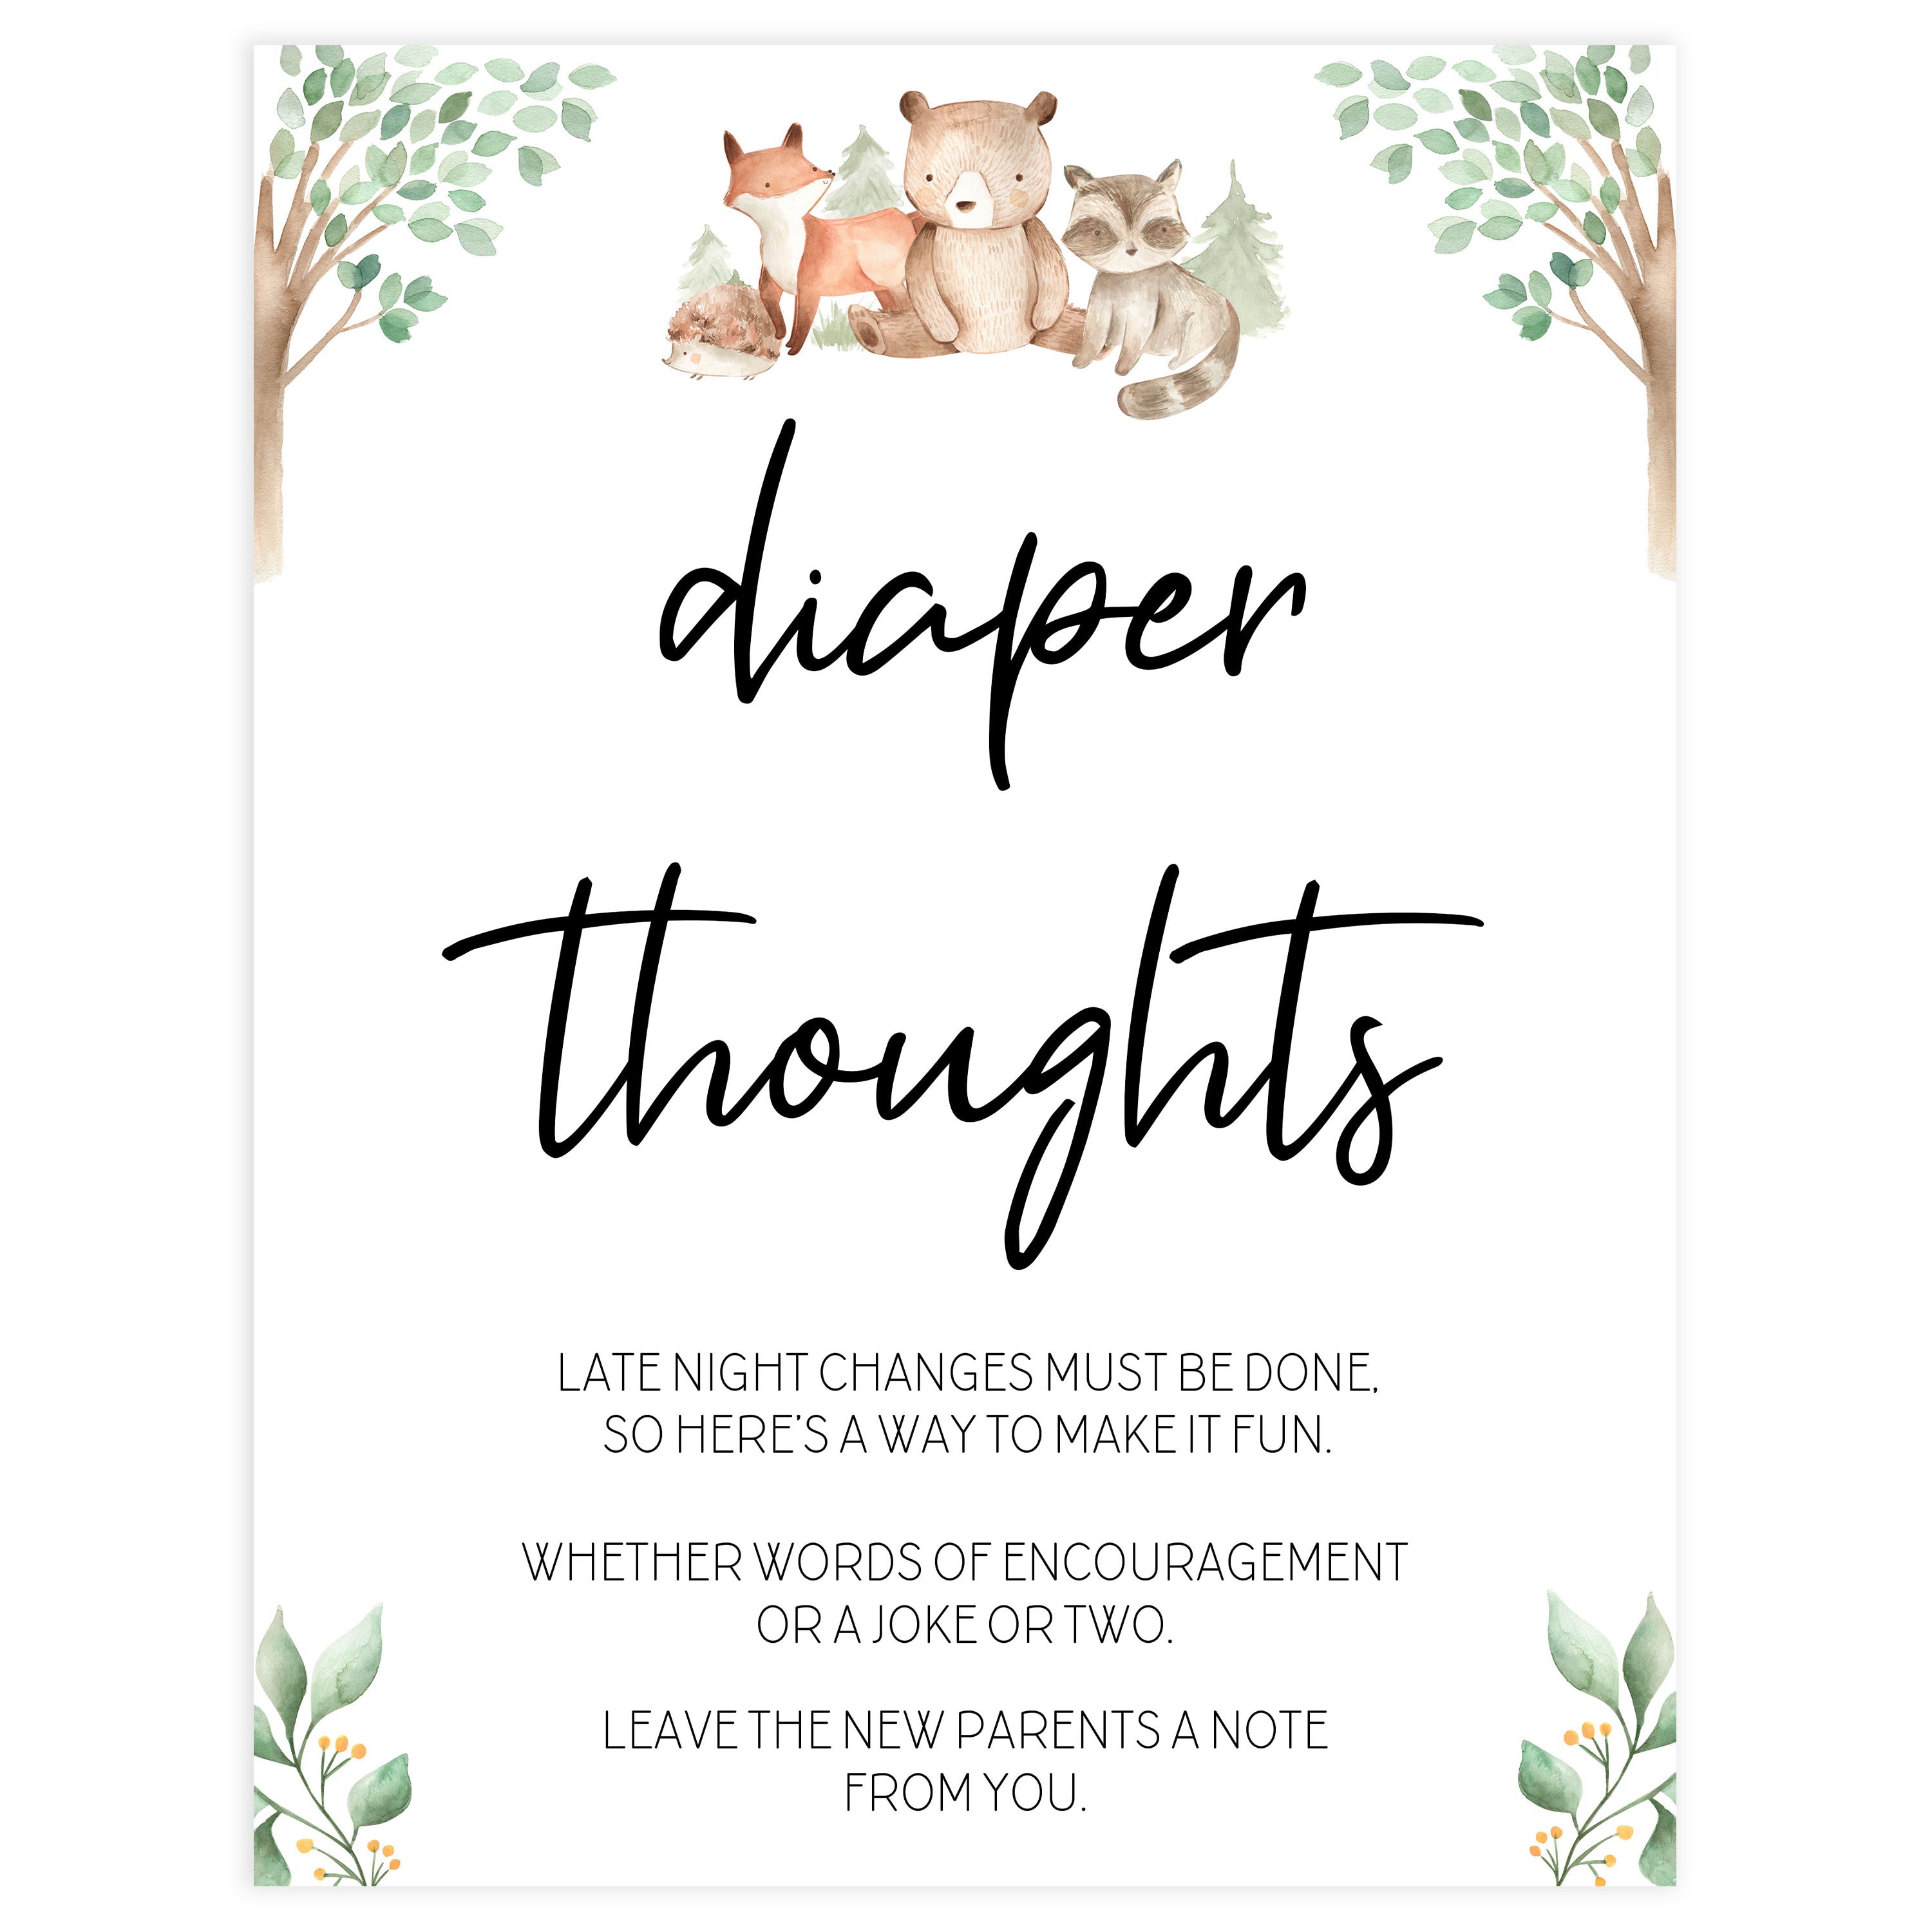 diaper thoughts baby shower games, Printable baby shower games, woodland animals baby games, baby shower games, fun baby shower ideas, top baby shower ideas, woodland baby shower, baby shower games, fun woodland animals baby shower ideas